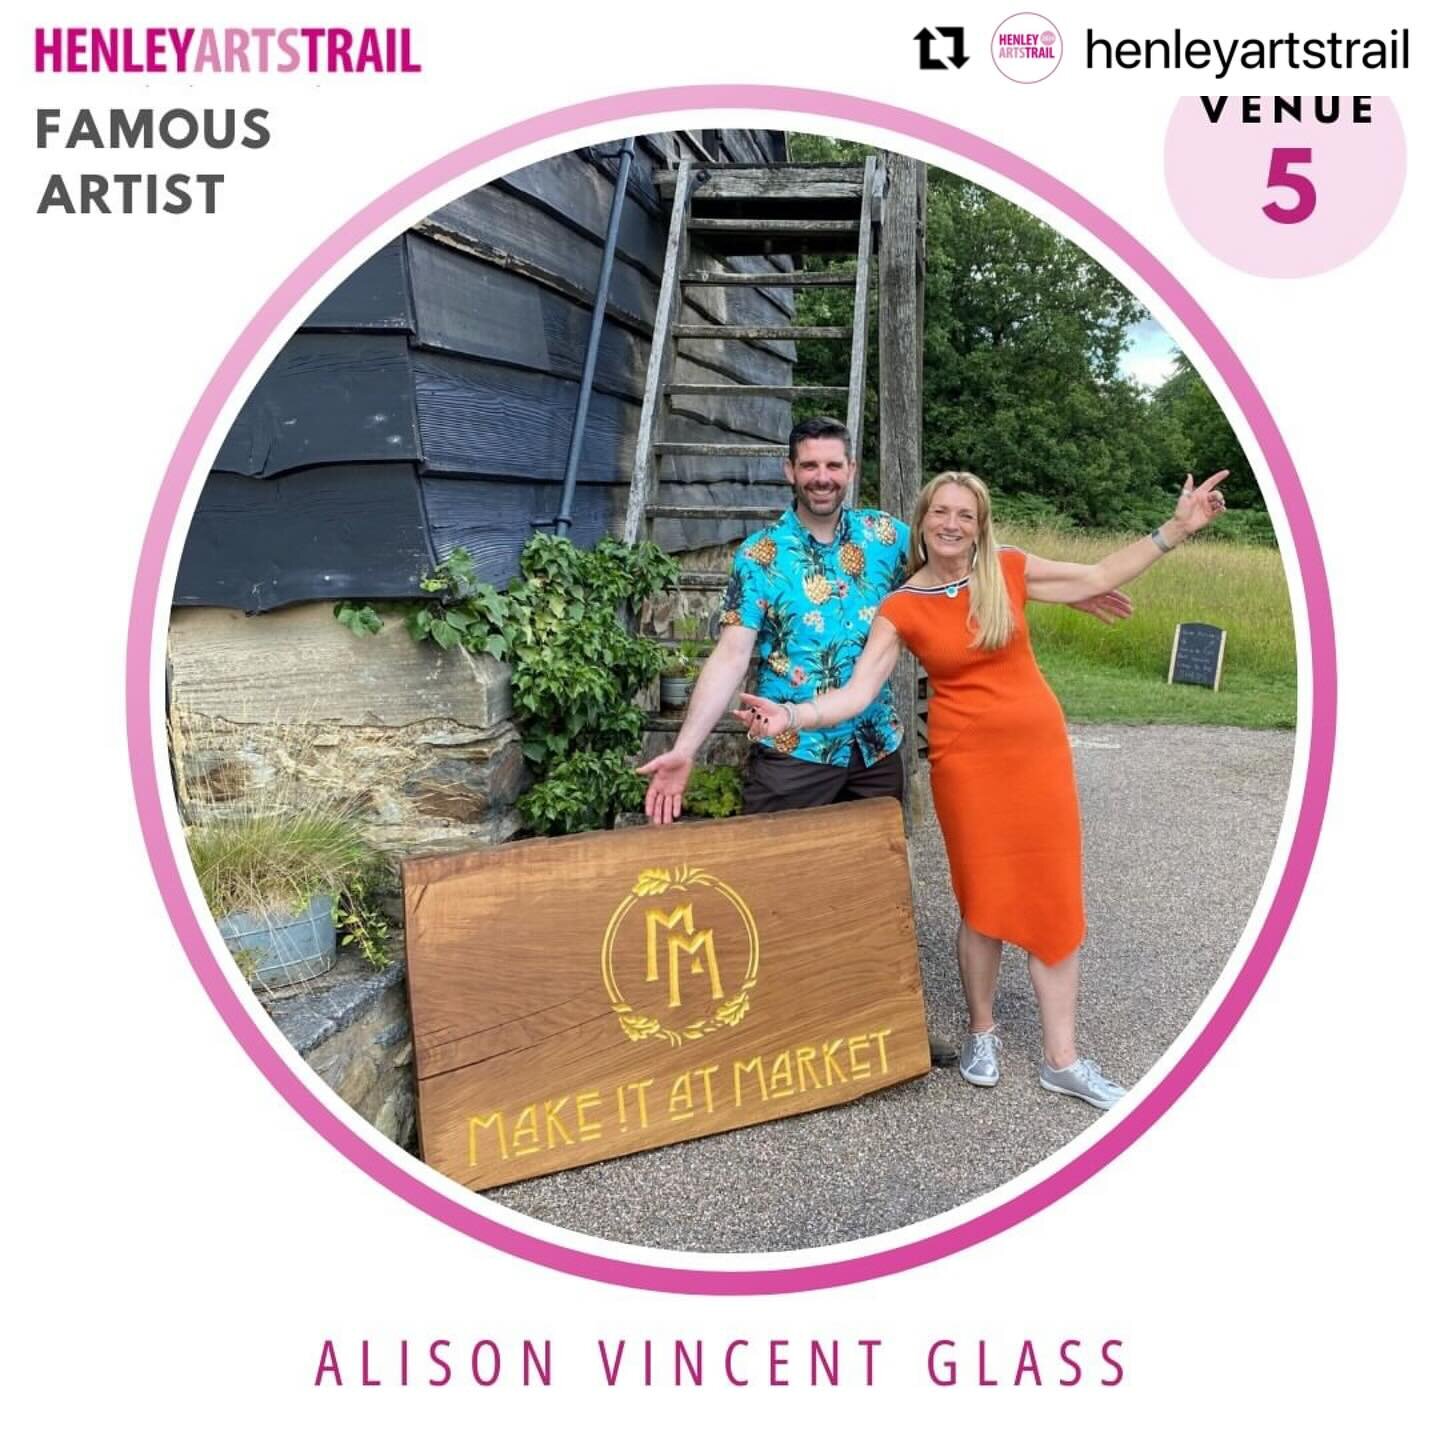 I&rsquo;m really excited that my glass art will be part of the Henley Arts Trail taking place on 3-6 May at River &amp; Rowing Museum on the banks of the Thames in Henley. 

https://www.alisonvincentglass.co.uk

🎨🖼️🔥🎨🖼️🔥🎨🖼️🔥🎨🖼️🔥🎨🖼️🔥🎨
